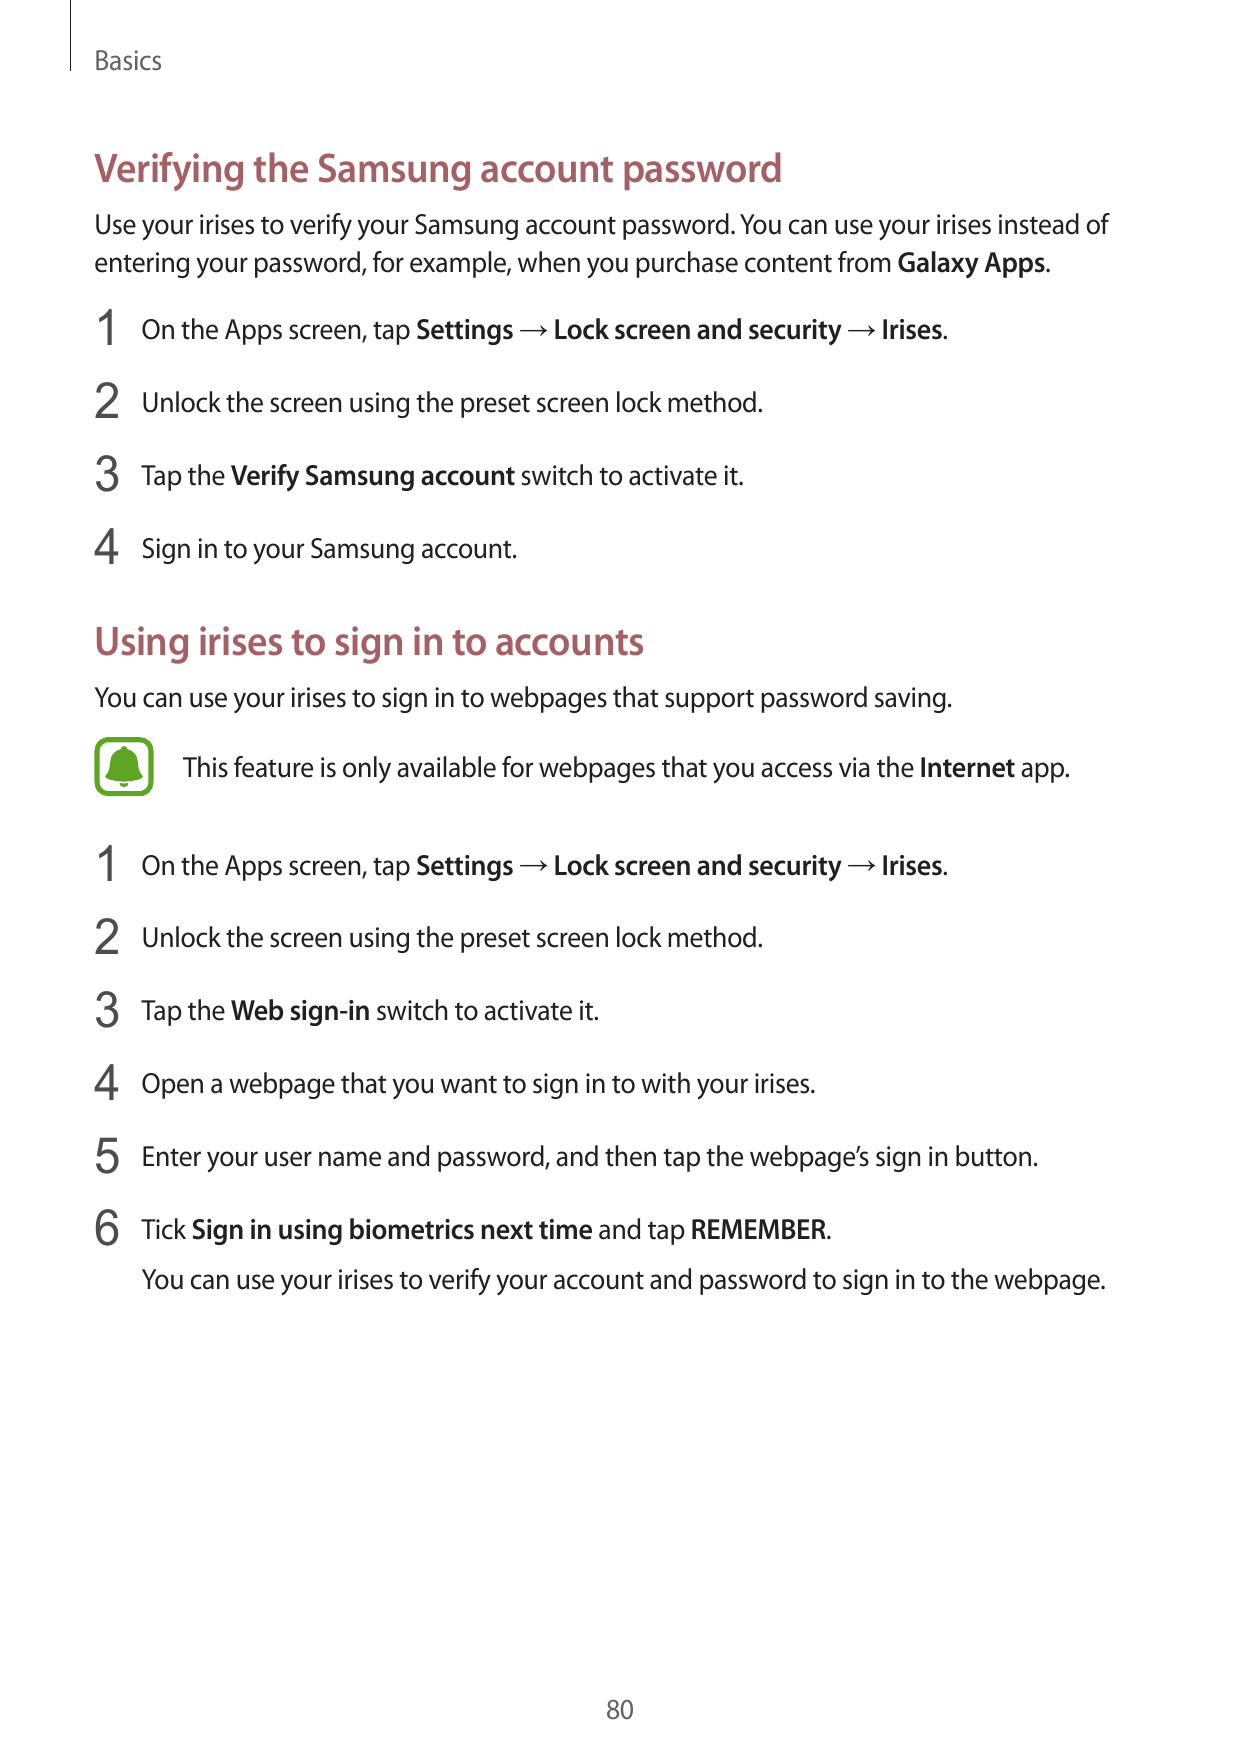 BasicsVerifying the Samsung account passwordUse your irises to verify your Samsung account password. You can use your irises ins